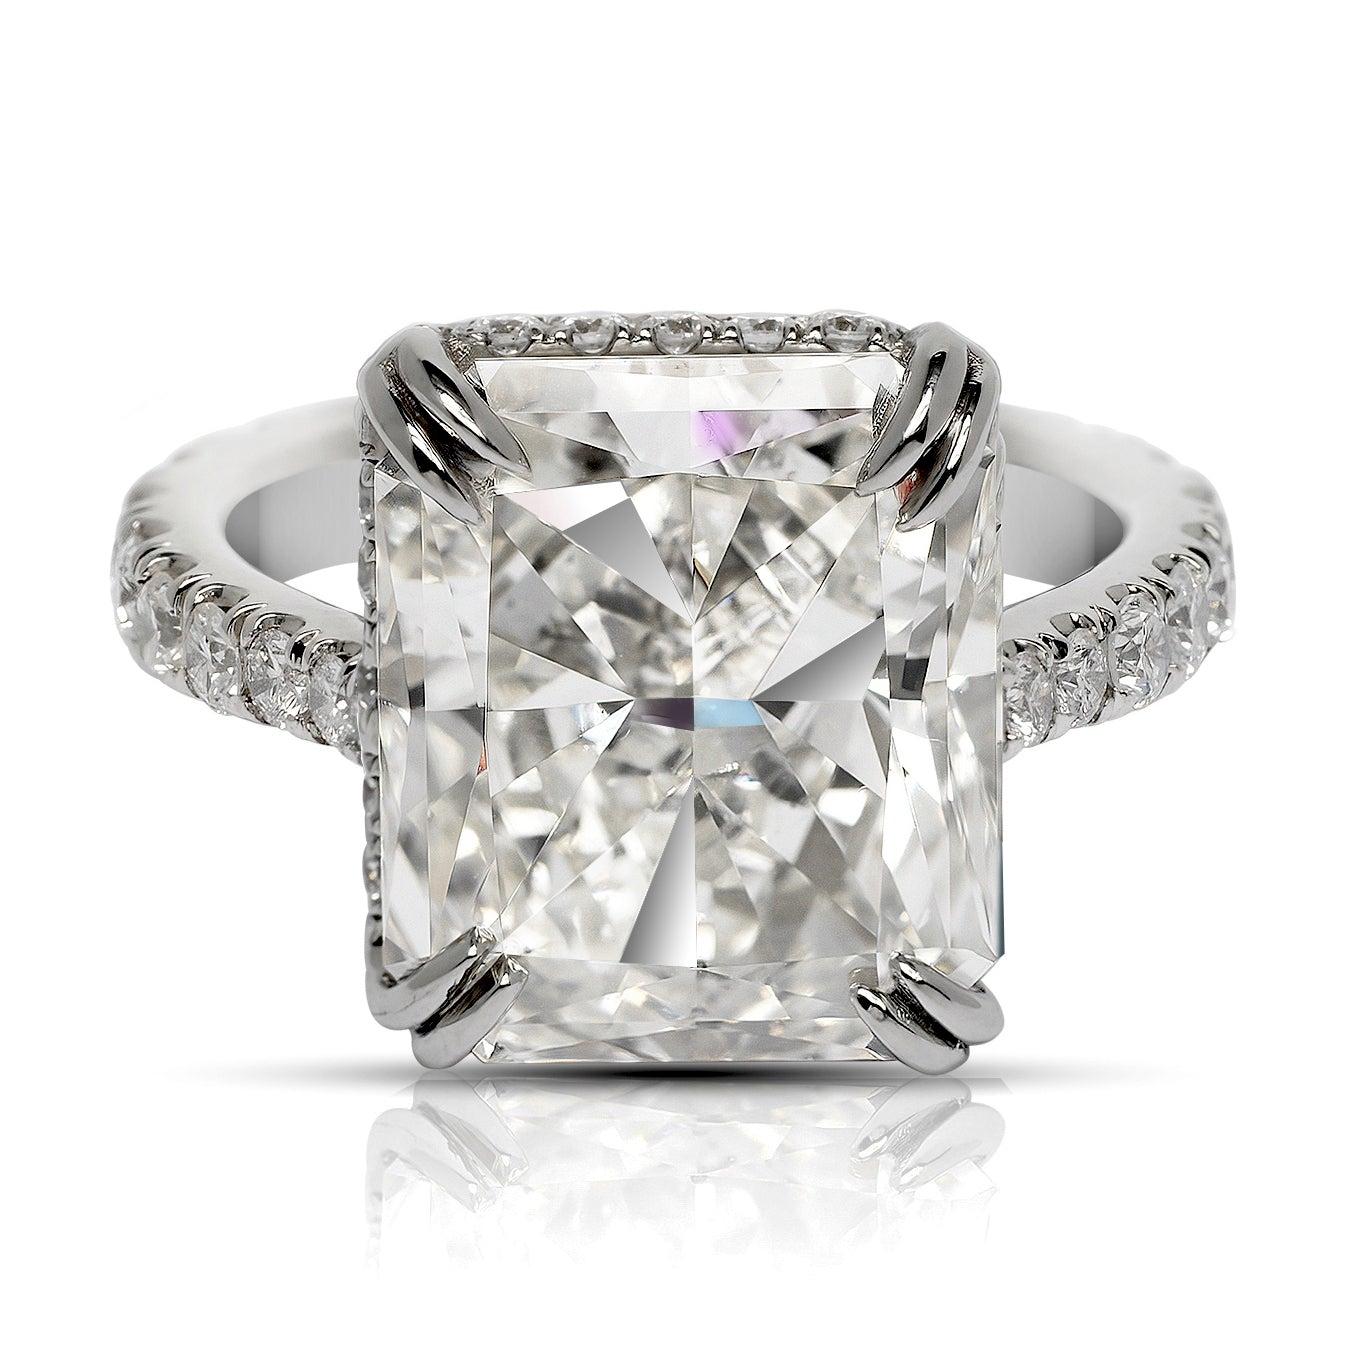 CLAIRE DIAMOND ENGAGEMENT PLATINUM RING BY MIKE NEKTA
 
GIA CERTIFIED
Center Diamond:
Carat Weight: 7 Carats
Color: K
Clarity: SI1
Style:  CUT-CORNERED RECTANGULAR MODIFIED BRILLIANT
Aproximate Measurements: 12.4 x 10.6 x 6.5 mm

Ring:
Metal: